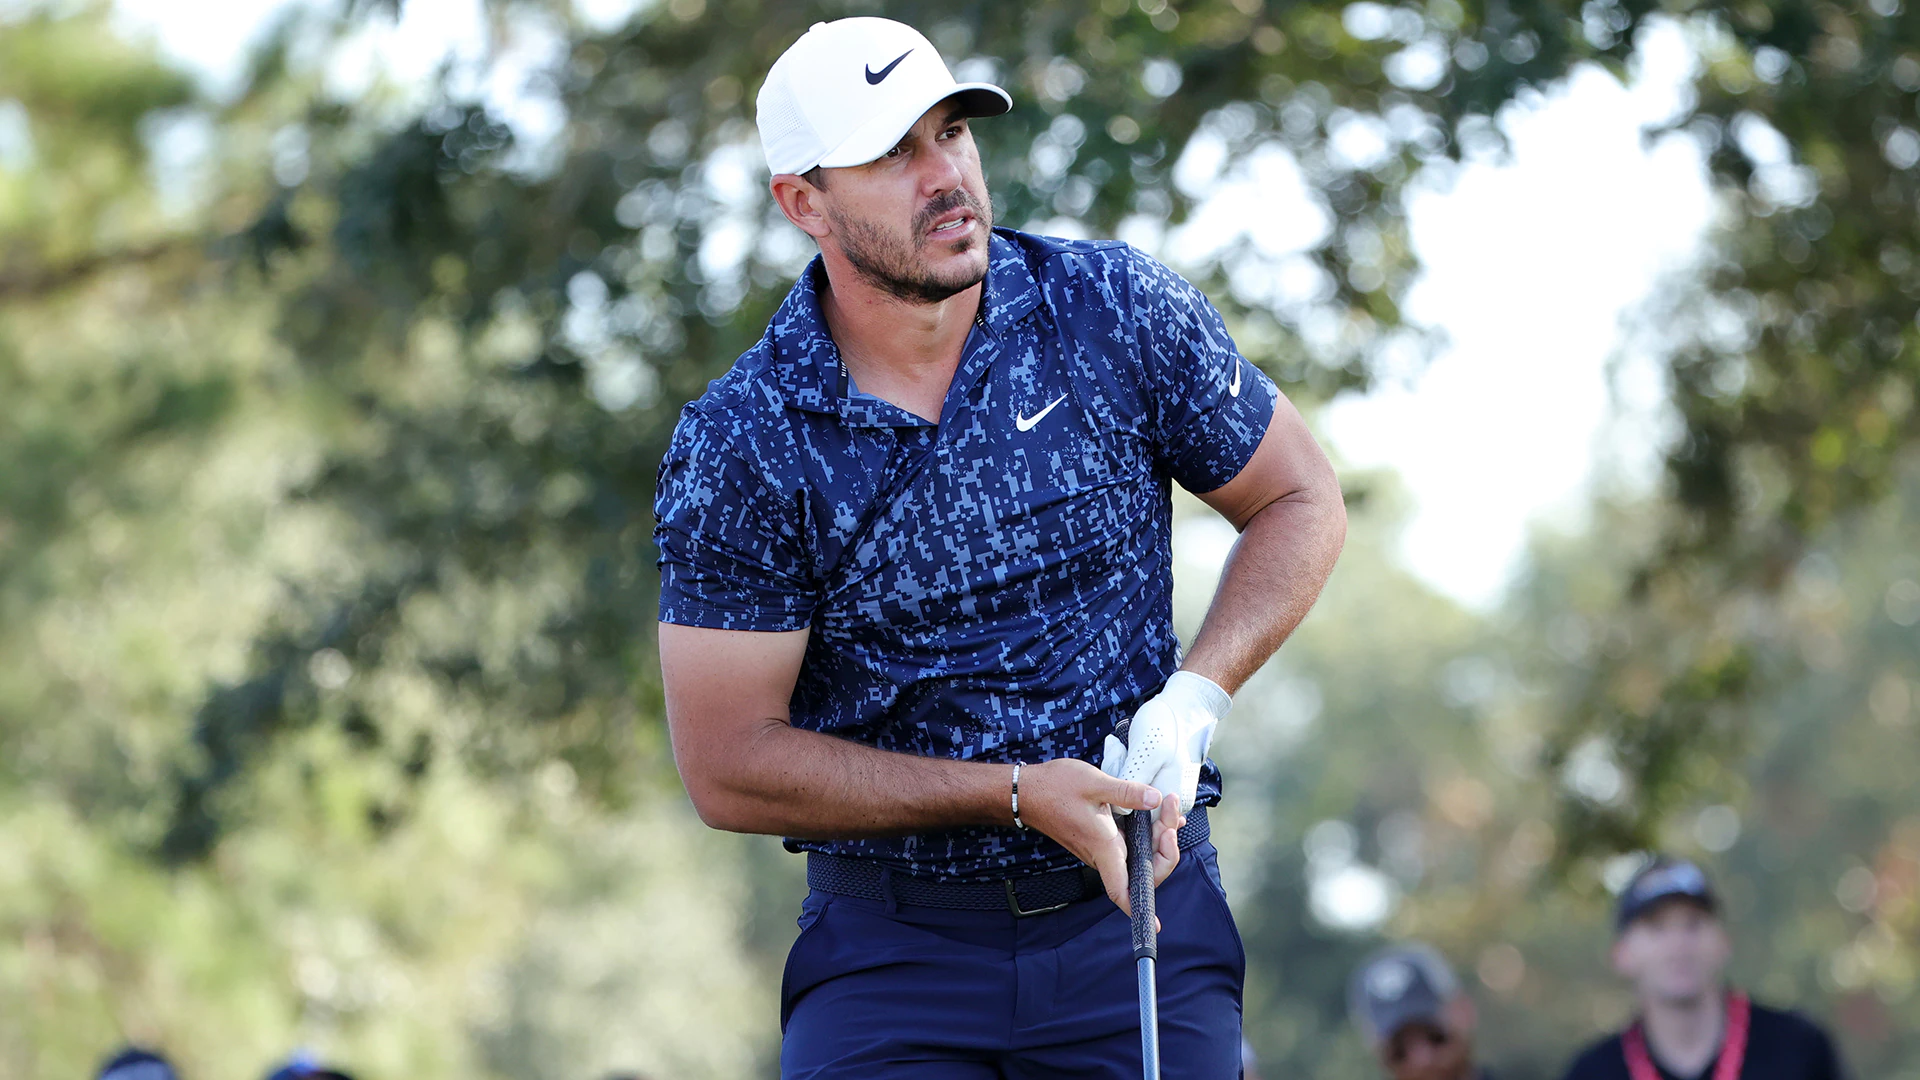 Instructor Randy Smith says ‘look-see’ at Brooks Koepka not start of something longterm